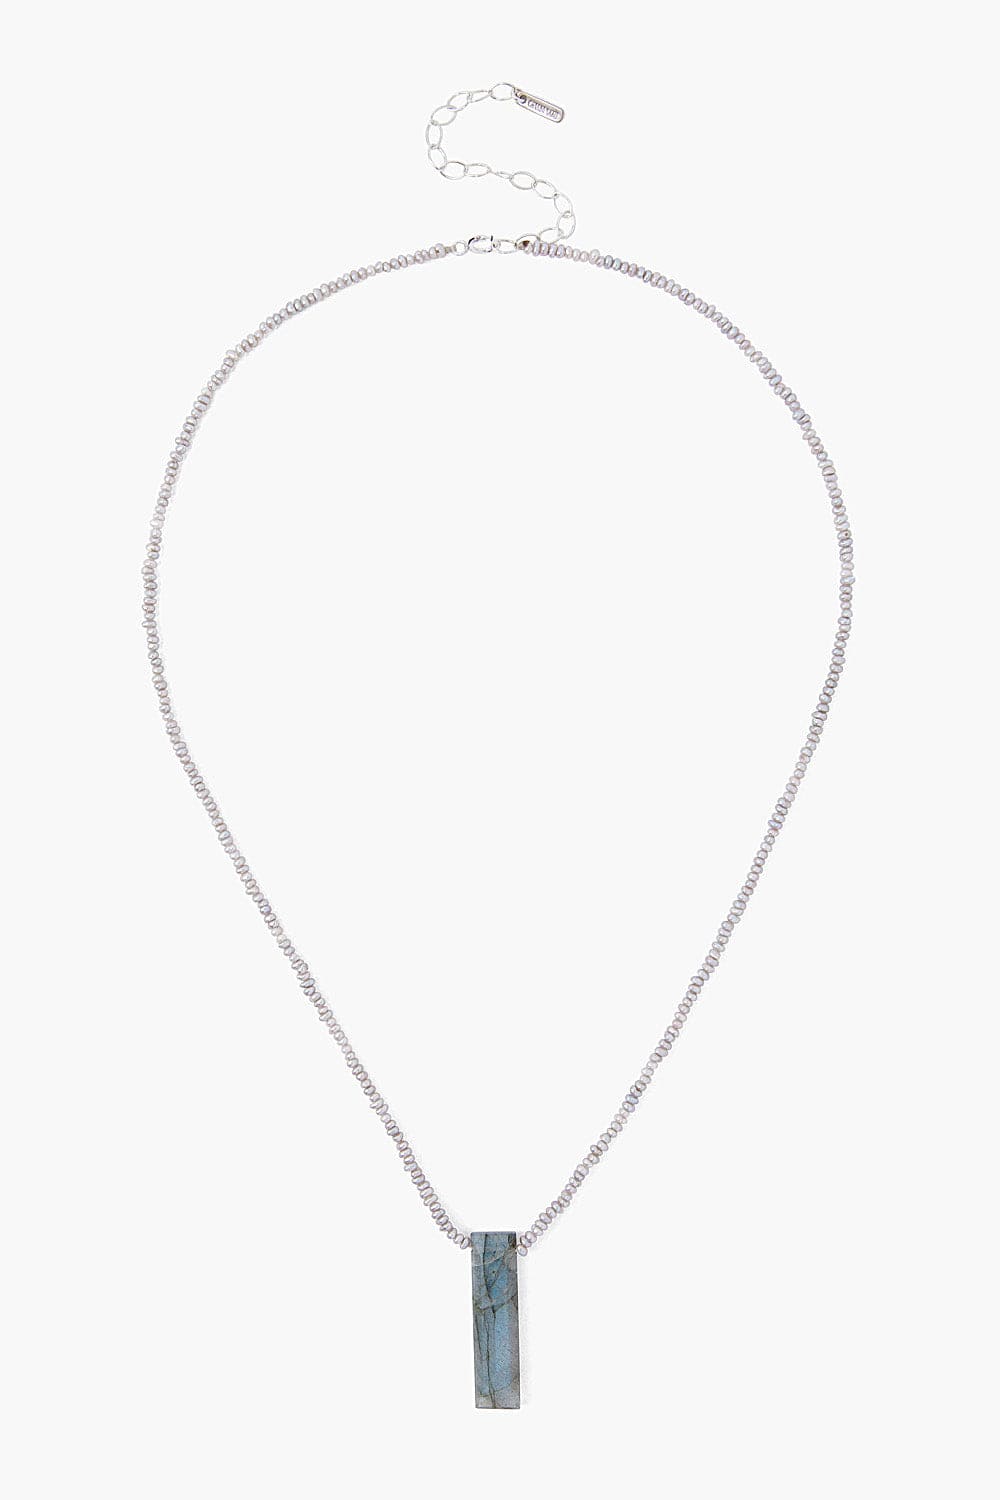 NKL Tiny Grey Pearls with Labradorite Tab Necklace